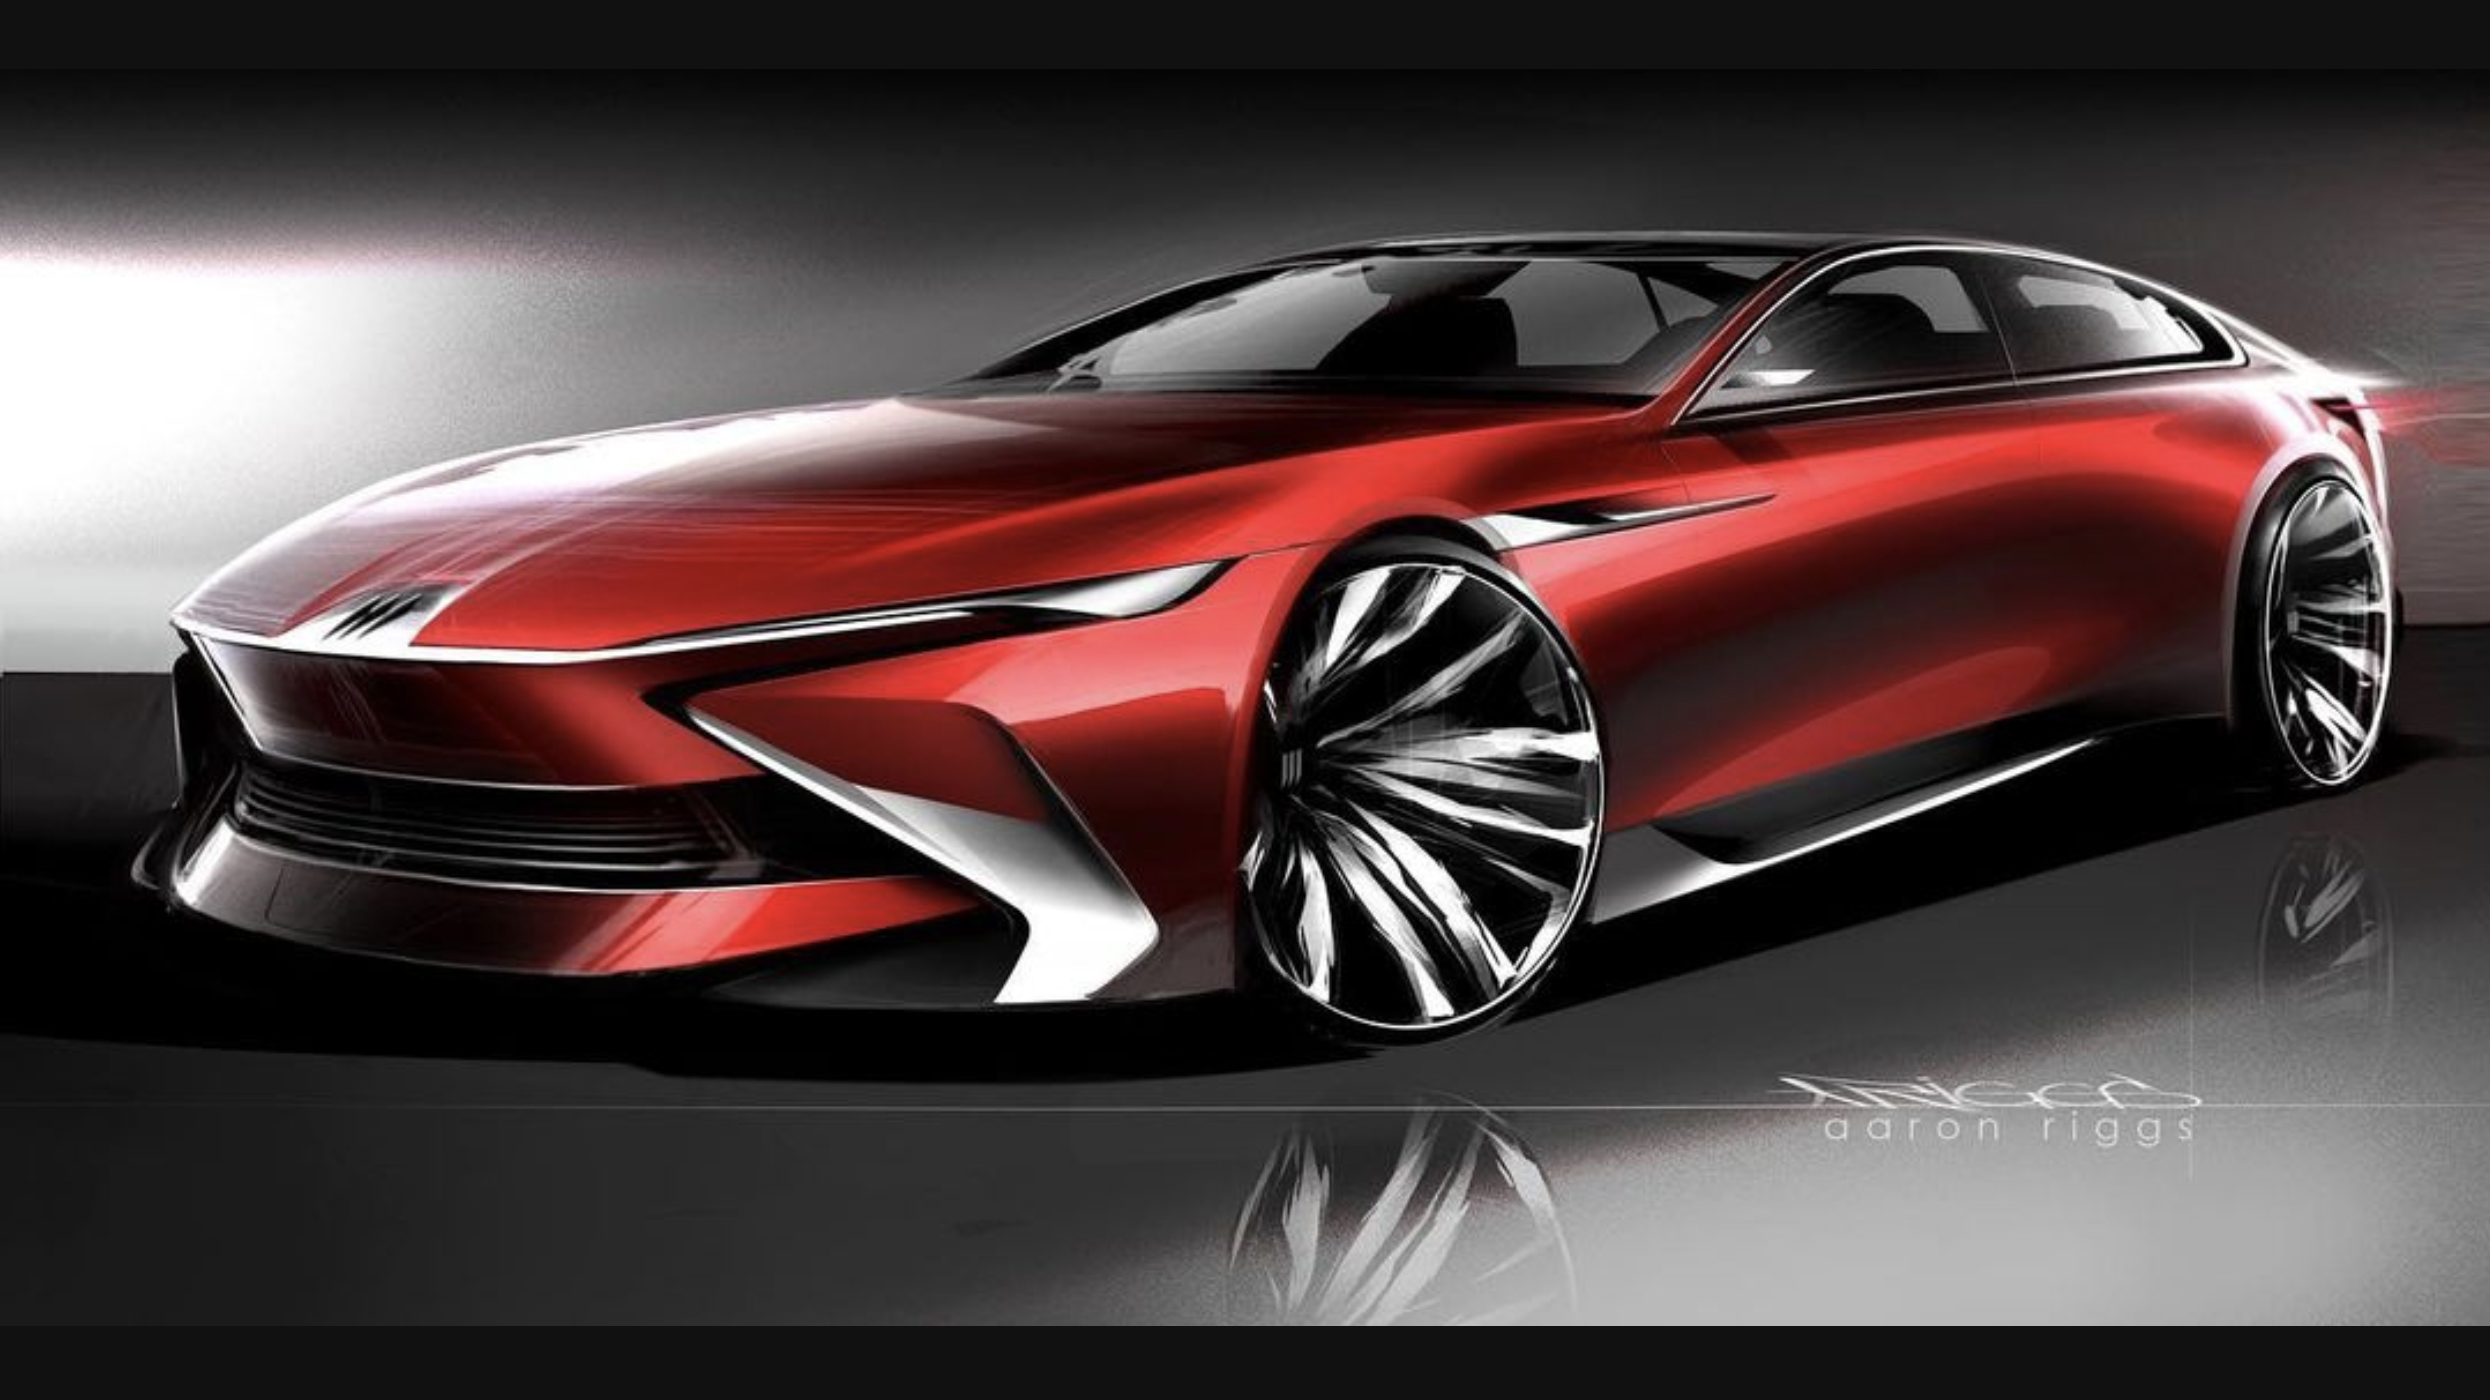 GM Design Team Releases Light And Athletic Sports Car Sketch